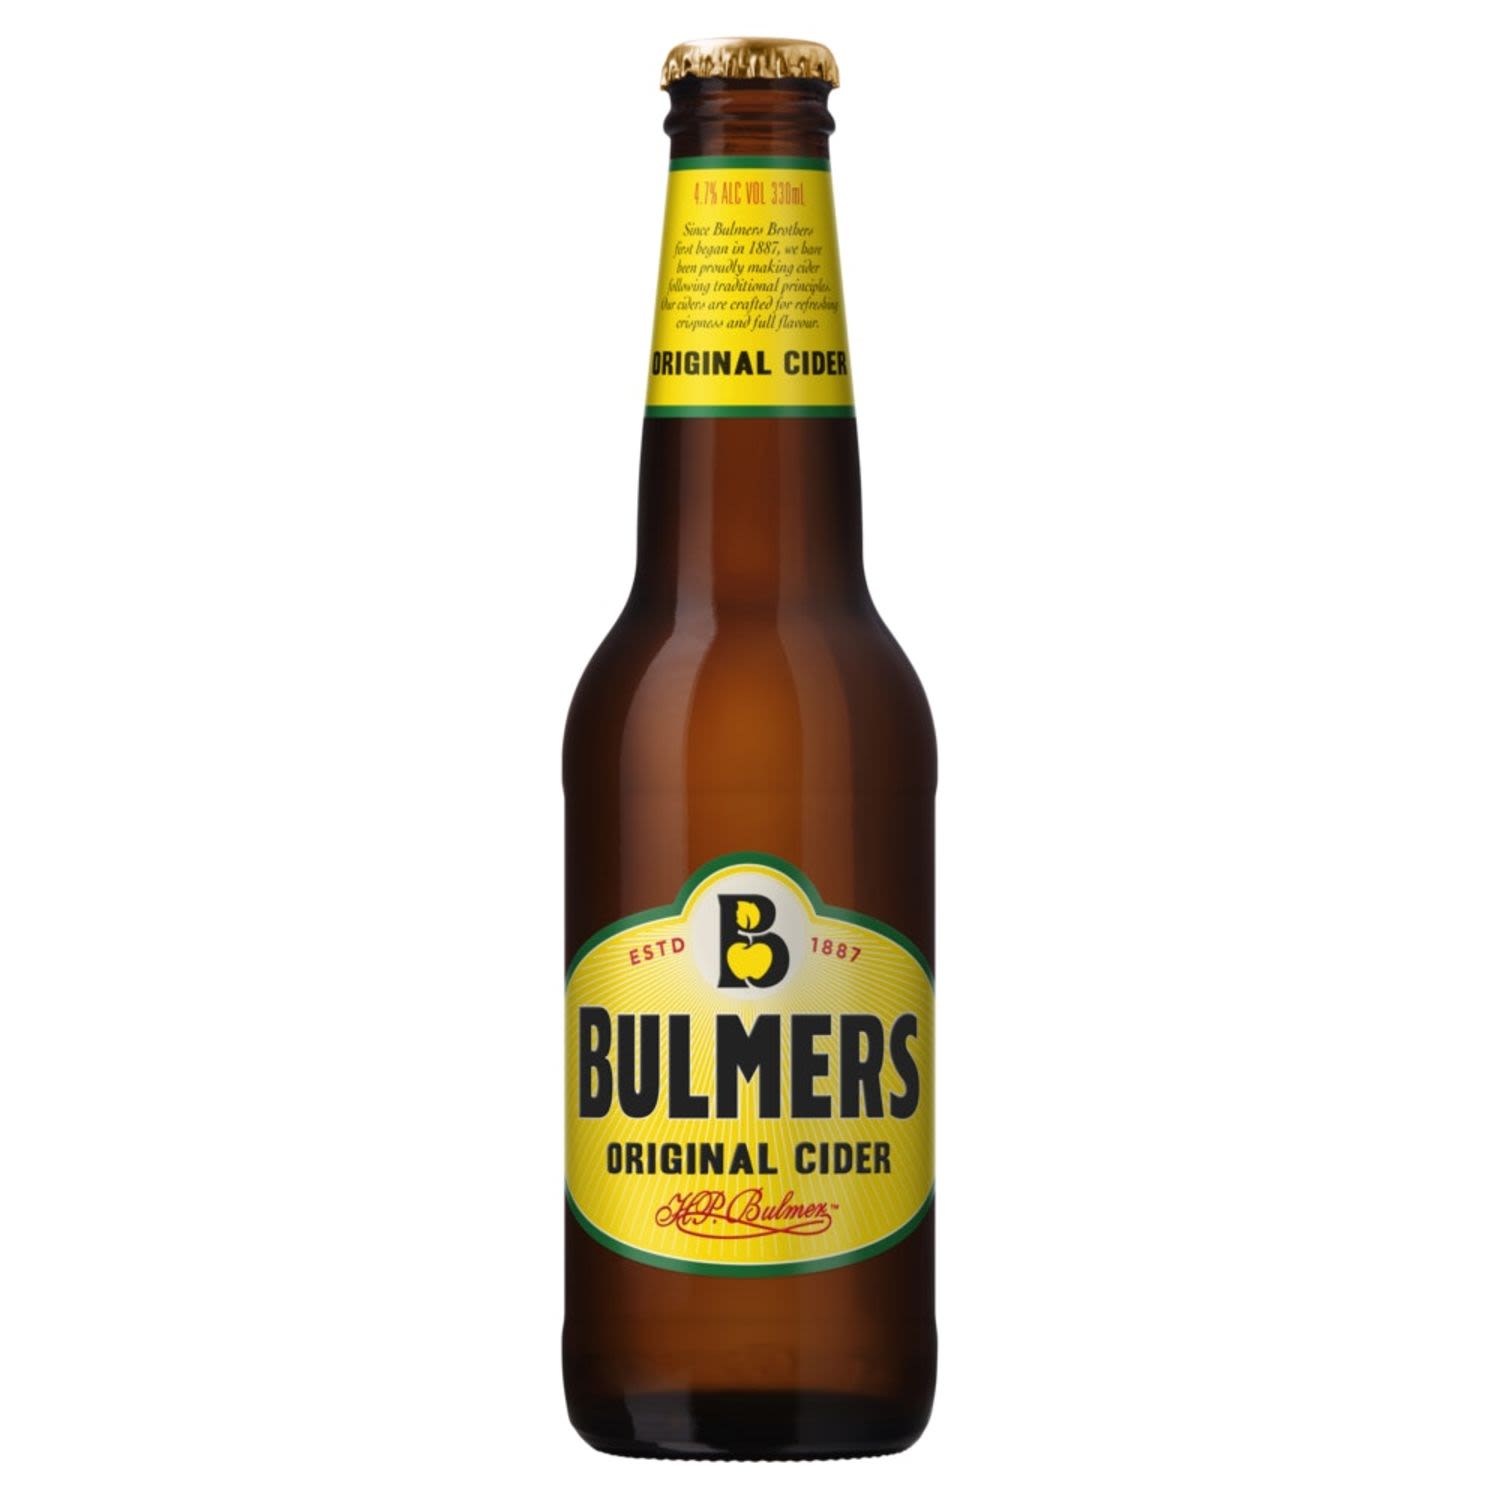 Bulmers Original Cider is quickly becoming a staple in most good pubs around the country. Bulmers is an authentic English-style apple Cider with a naturally refreshing taste and crisp character. A premium Cider for all occasions.<br /> <br />Alcohol Volume: 4.70%<br /><br />Pack Format: Bottle<br /><br />Standard Drinks: 1.2</br /><br />Pack Type: Bottle<br /><br />Country of Origin: Australia<br />